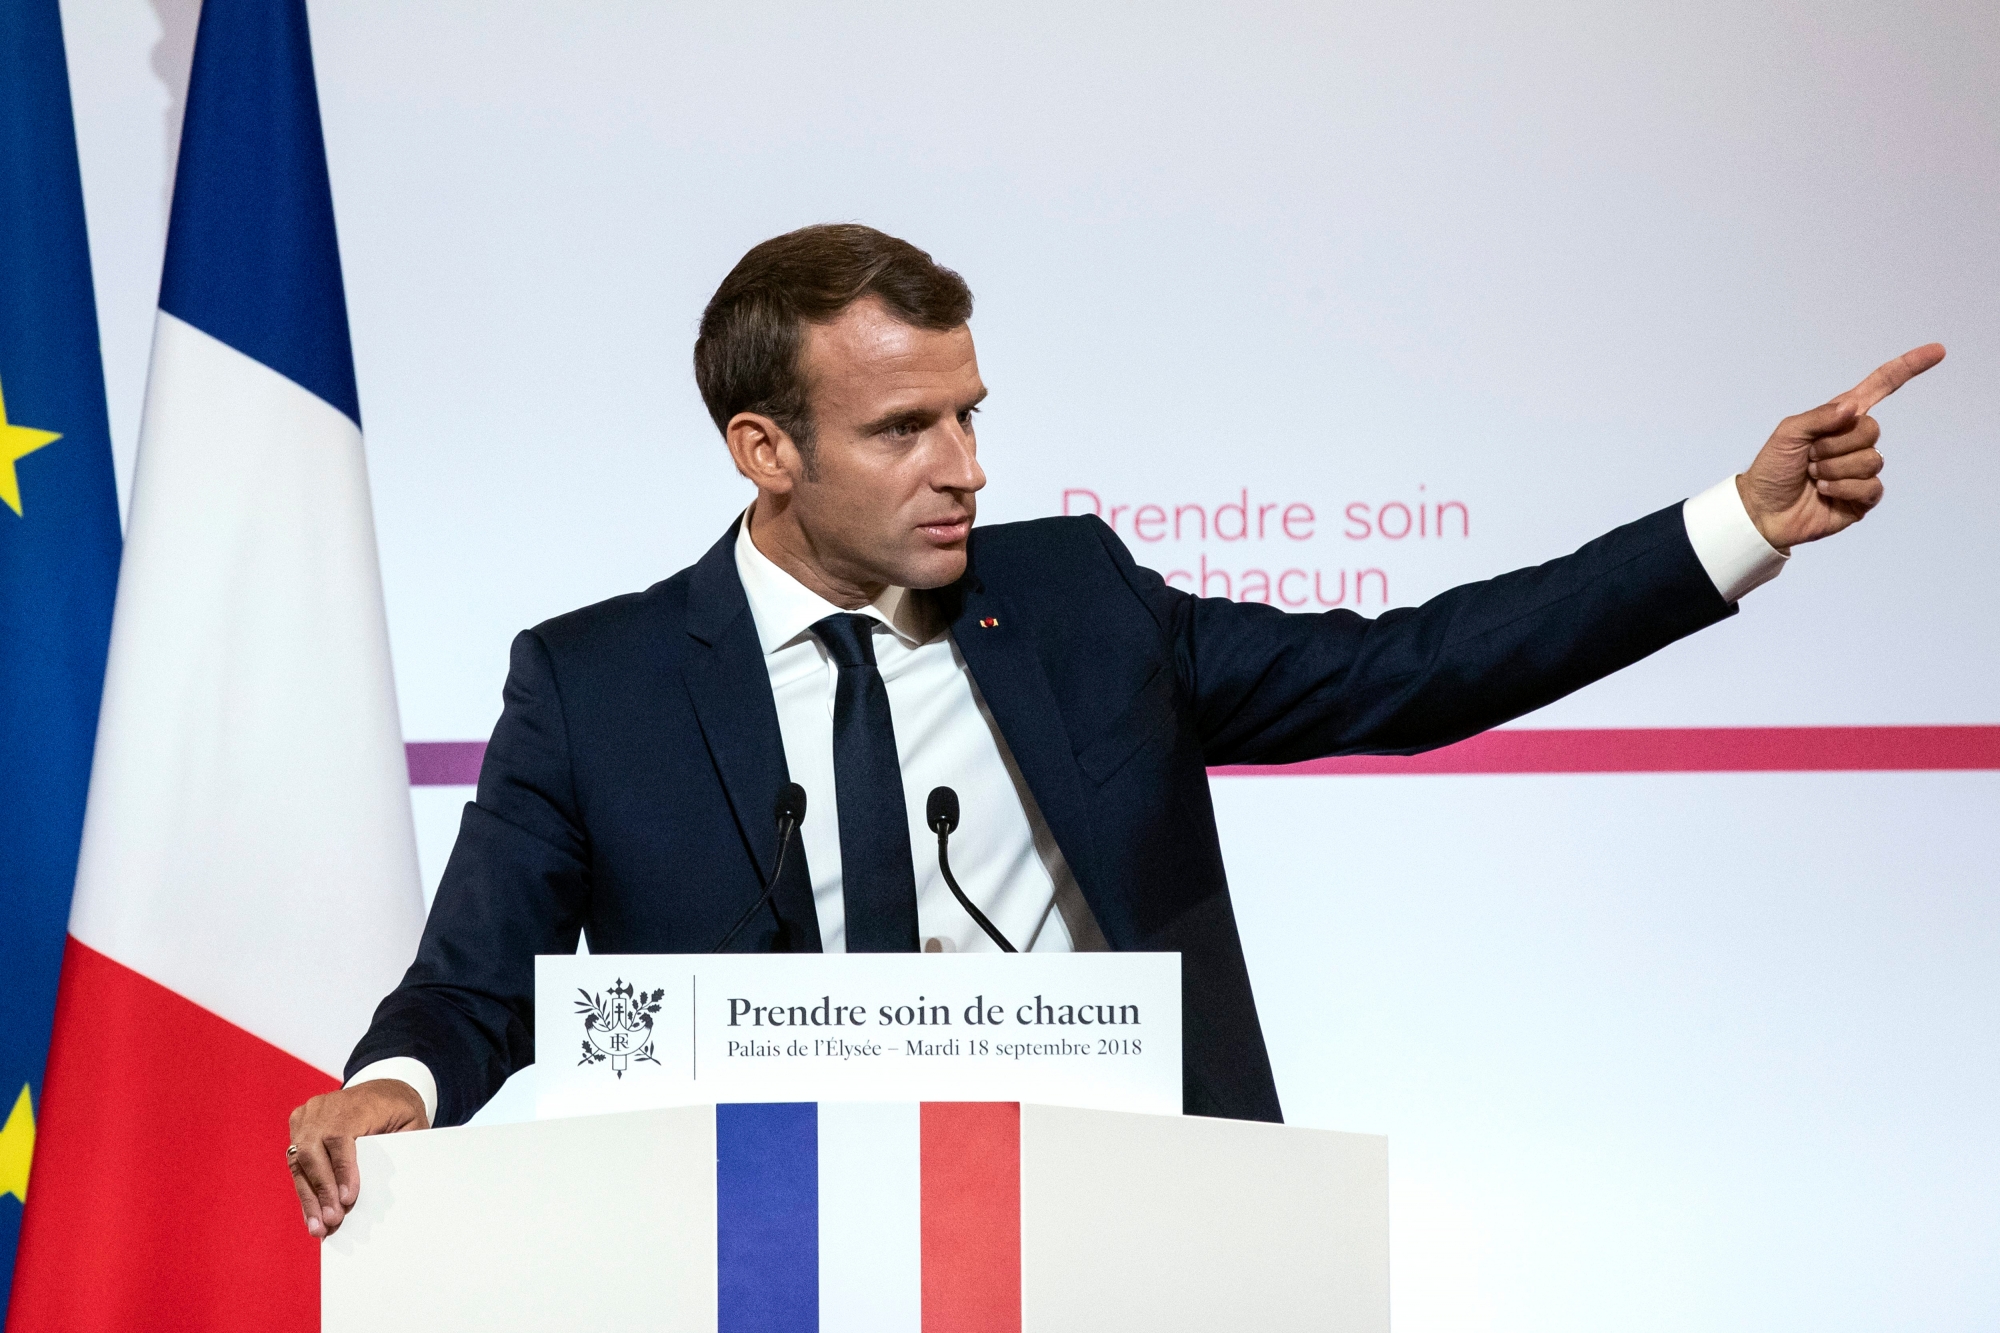 epa07029307 French President Emmanuel Macron delivers a speech on the transformation of the French healthcare system at the Elysee Palace in Paris, France, 18 September 2018.  EPA/ETIENNE LAURENT/POOL MAXPPP OUT FRANCE GOVERNMENT HEALTHCARE